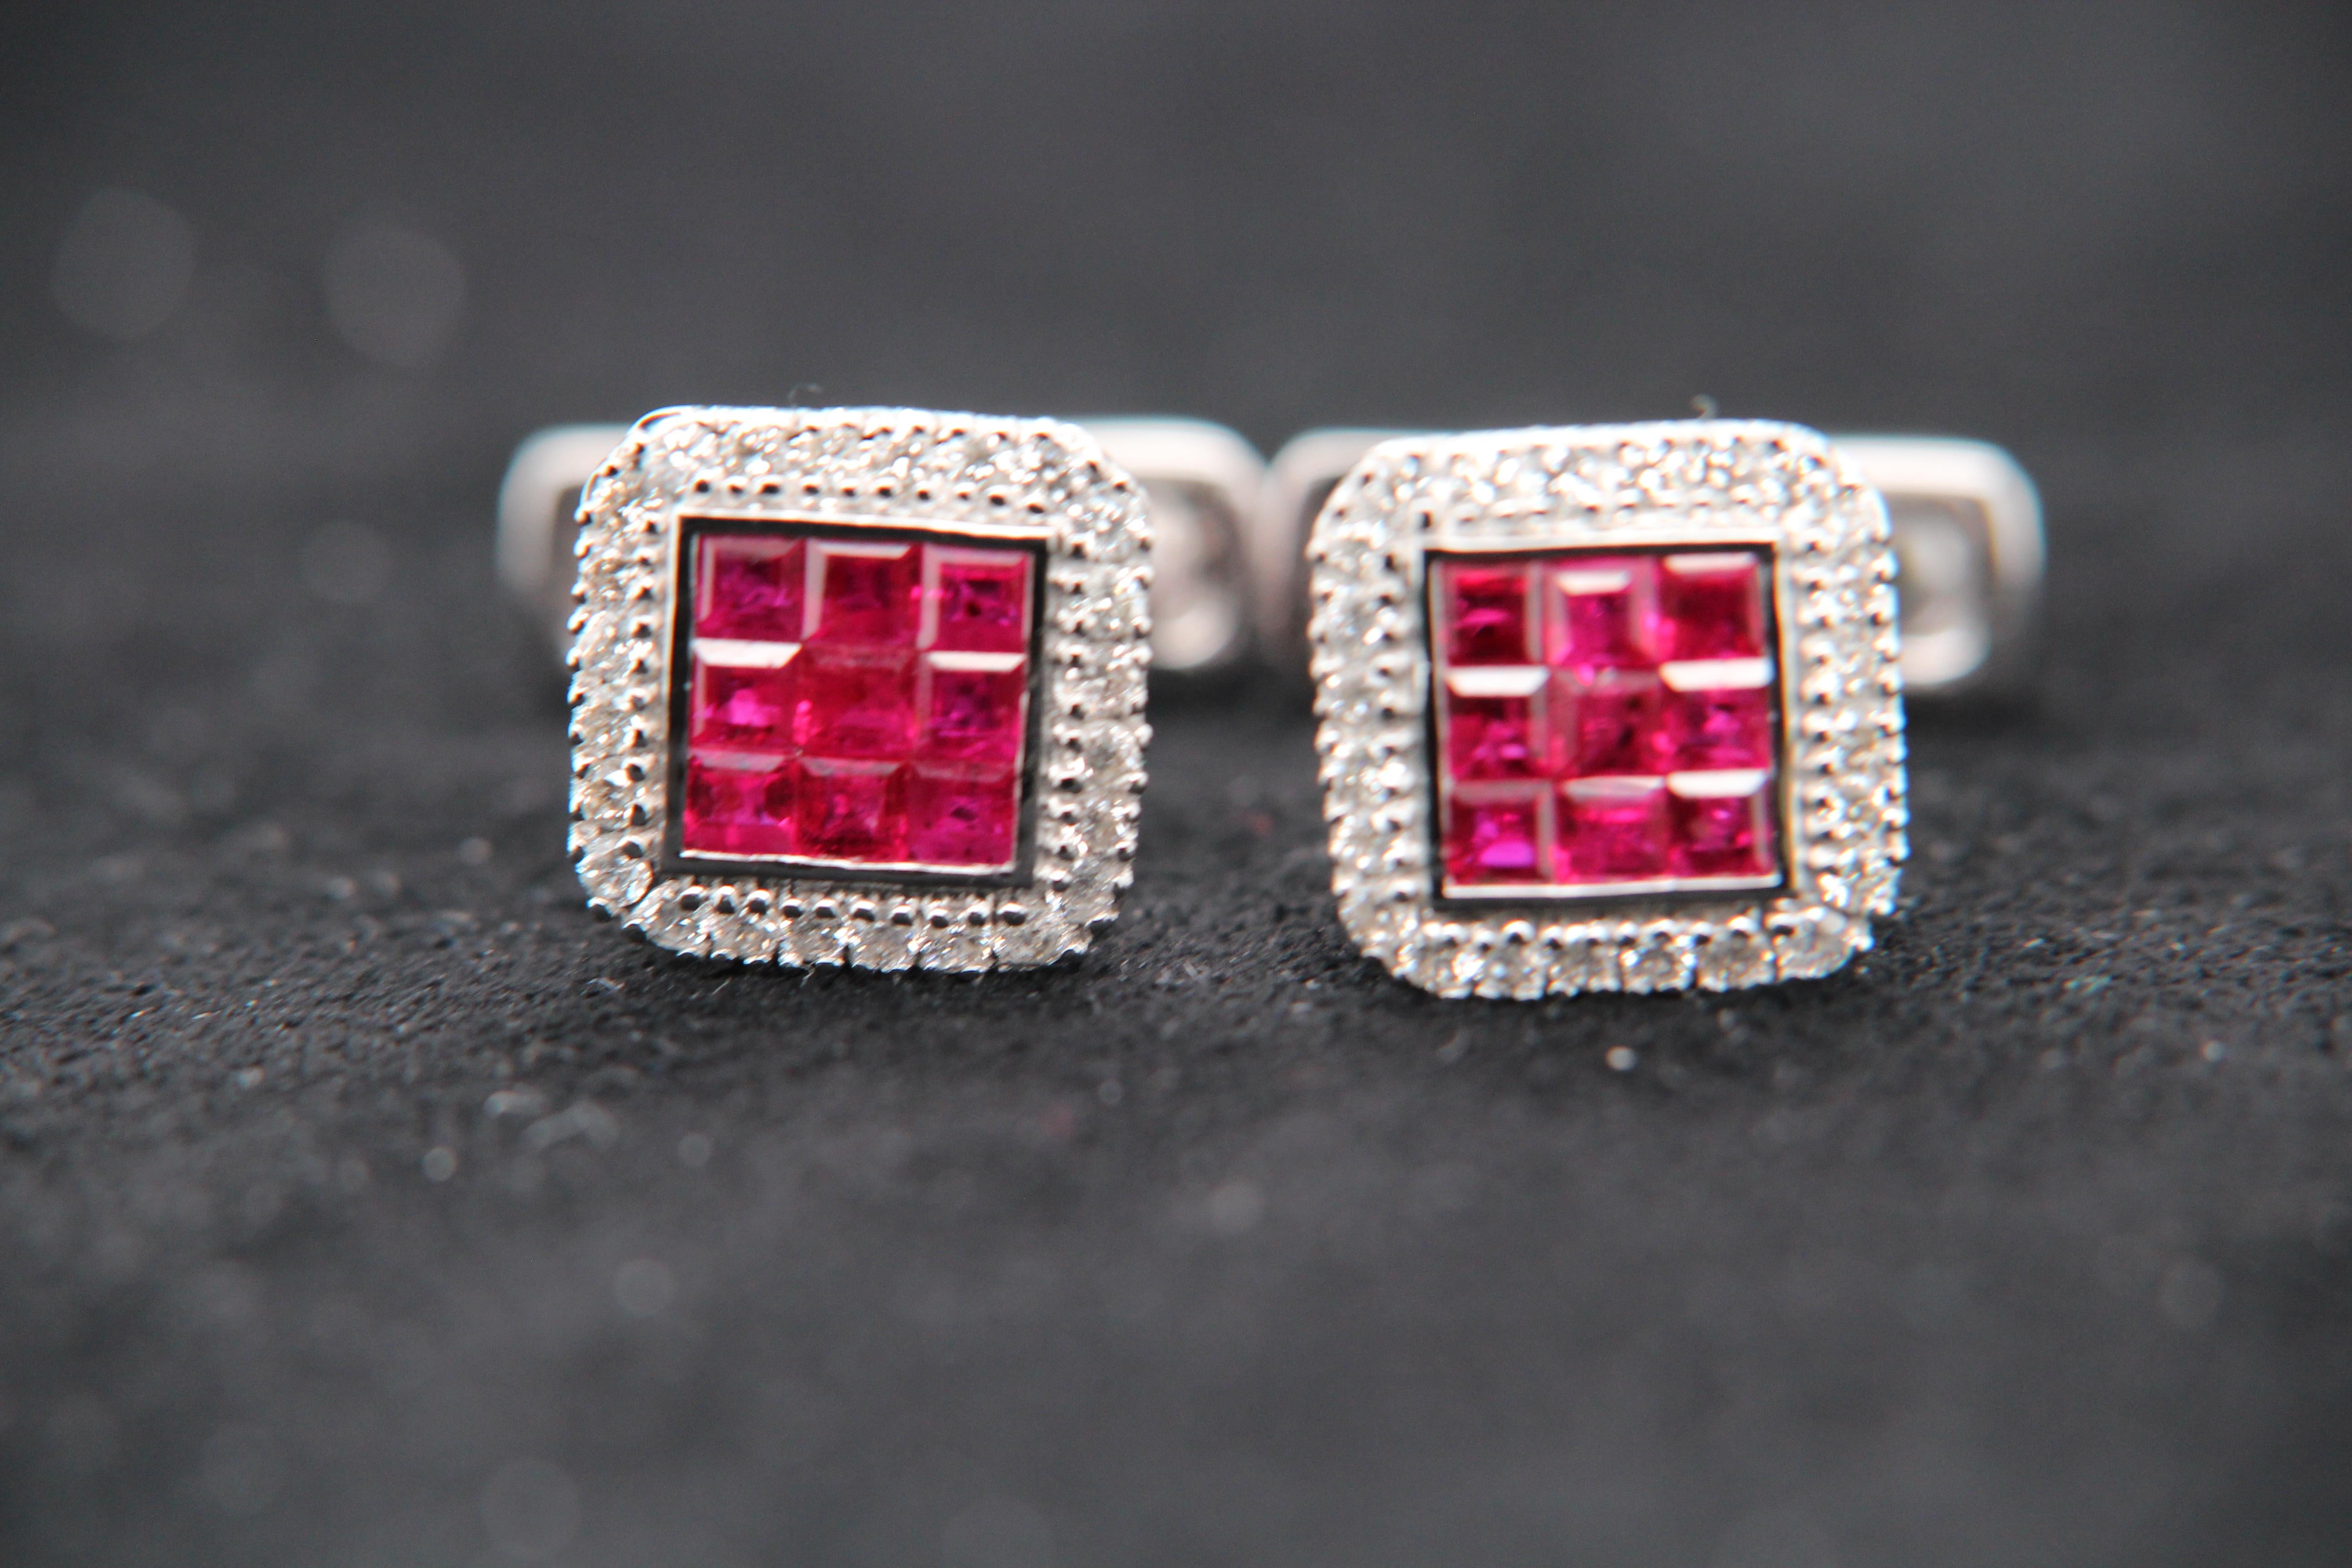 A ruby and diamond cufflink. The cufflink is studded with 1.02 carat rubies and 0.48 carat diamonds. It is made in 18 karat white gold 6.98 g gross weight.